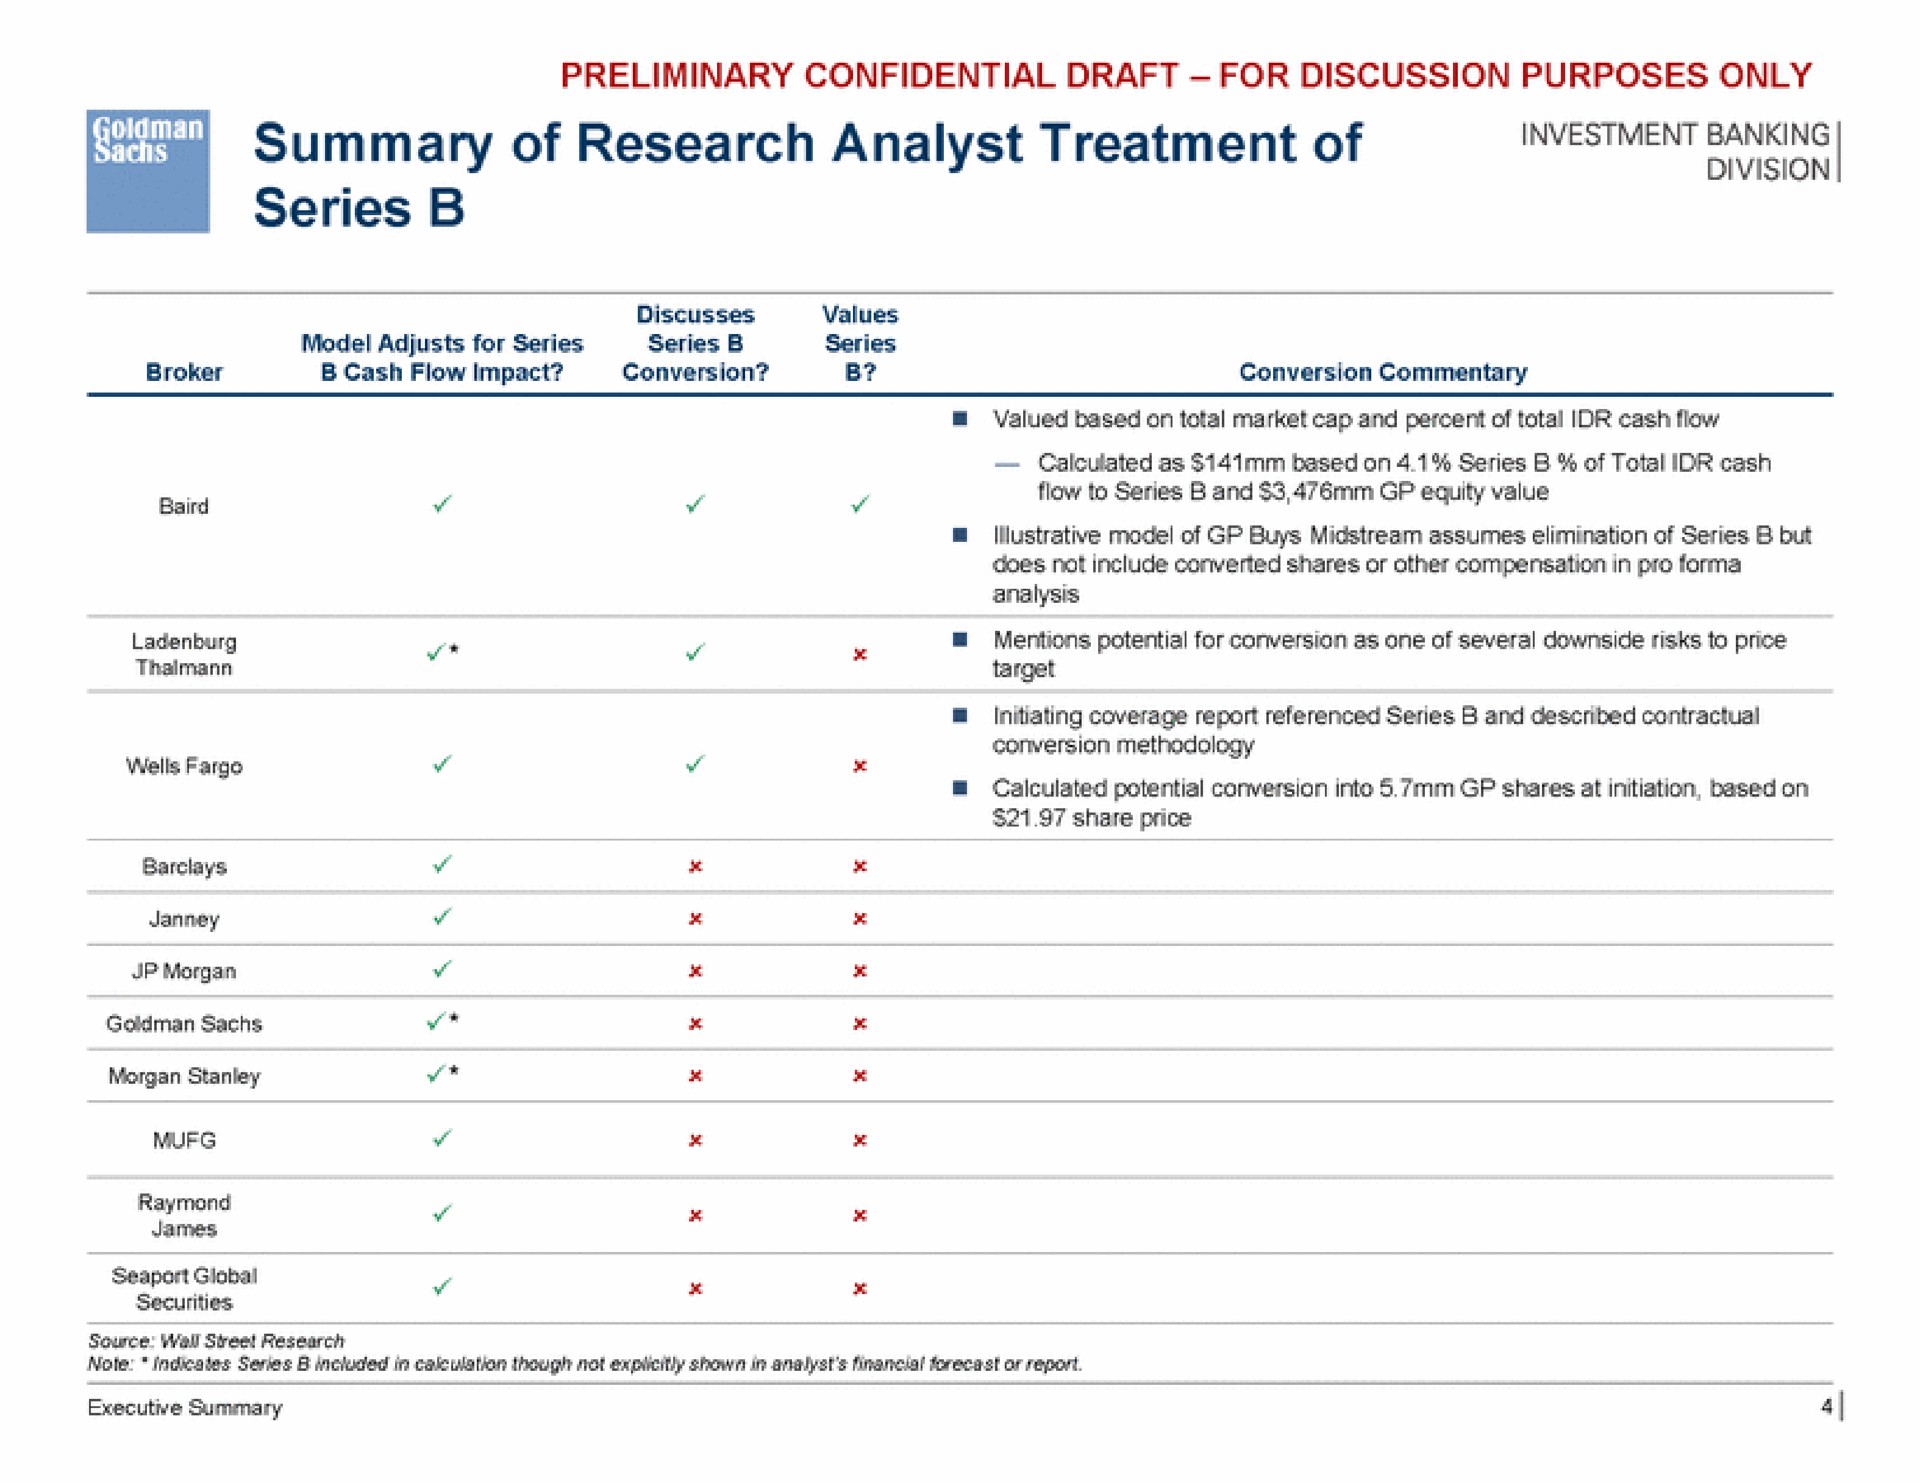 summary of research analyst treatment of series a | Goldman Sachs